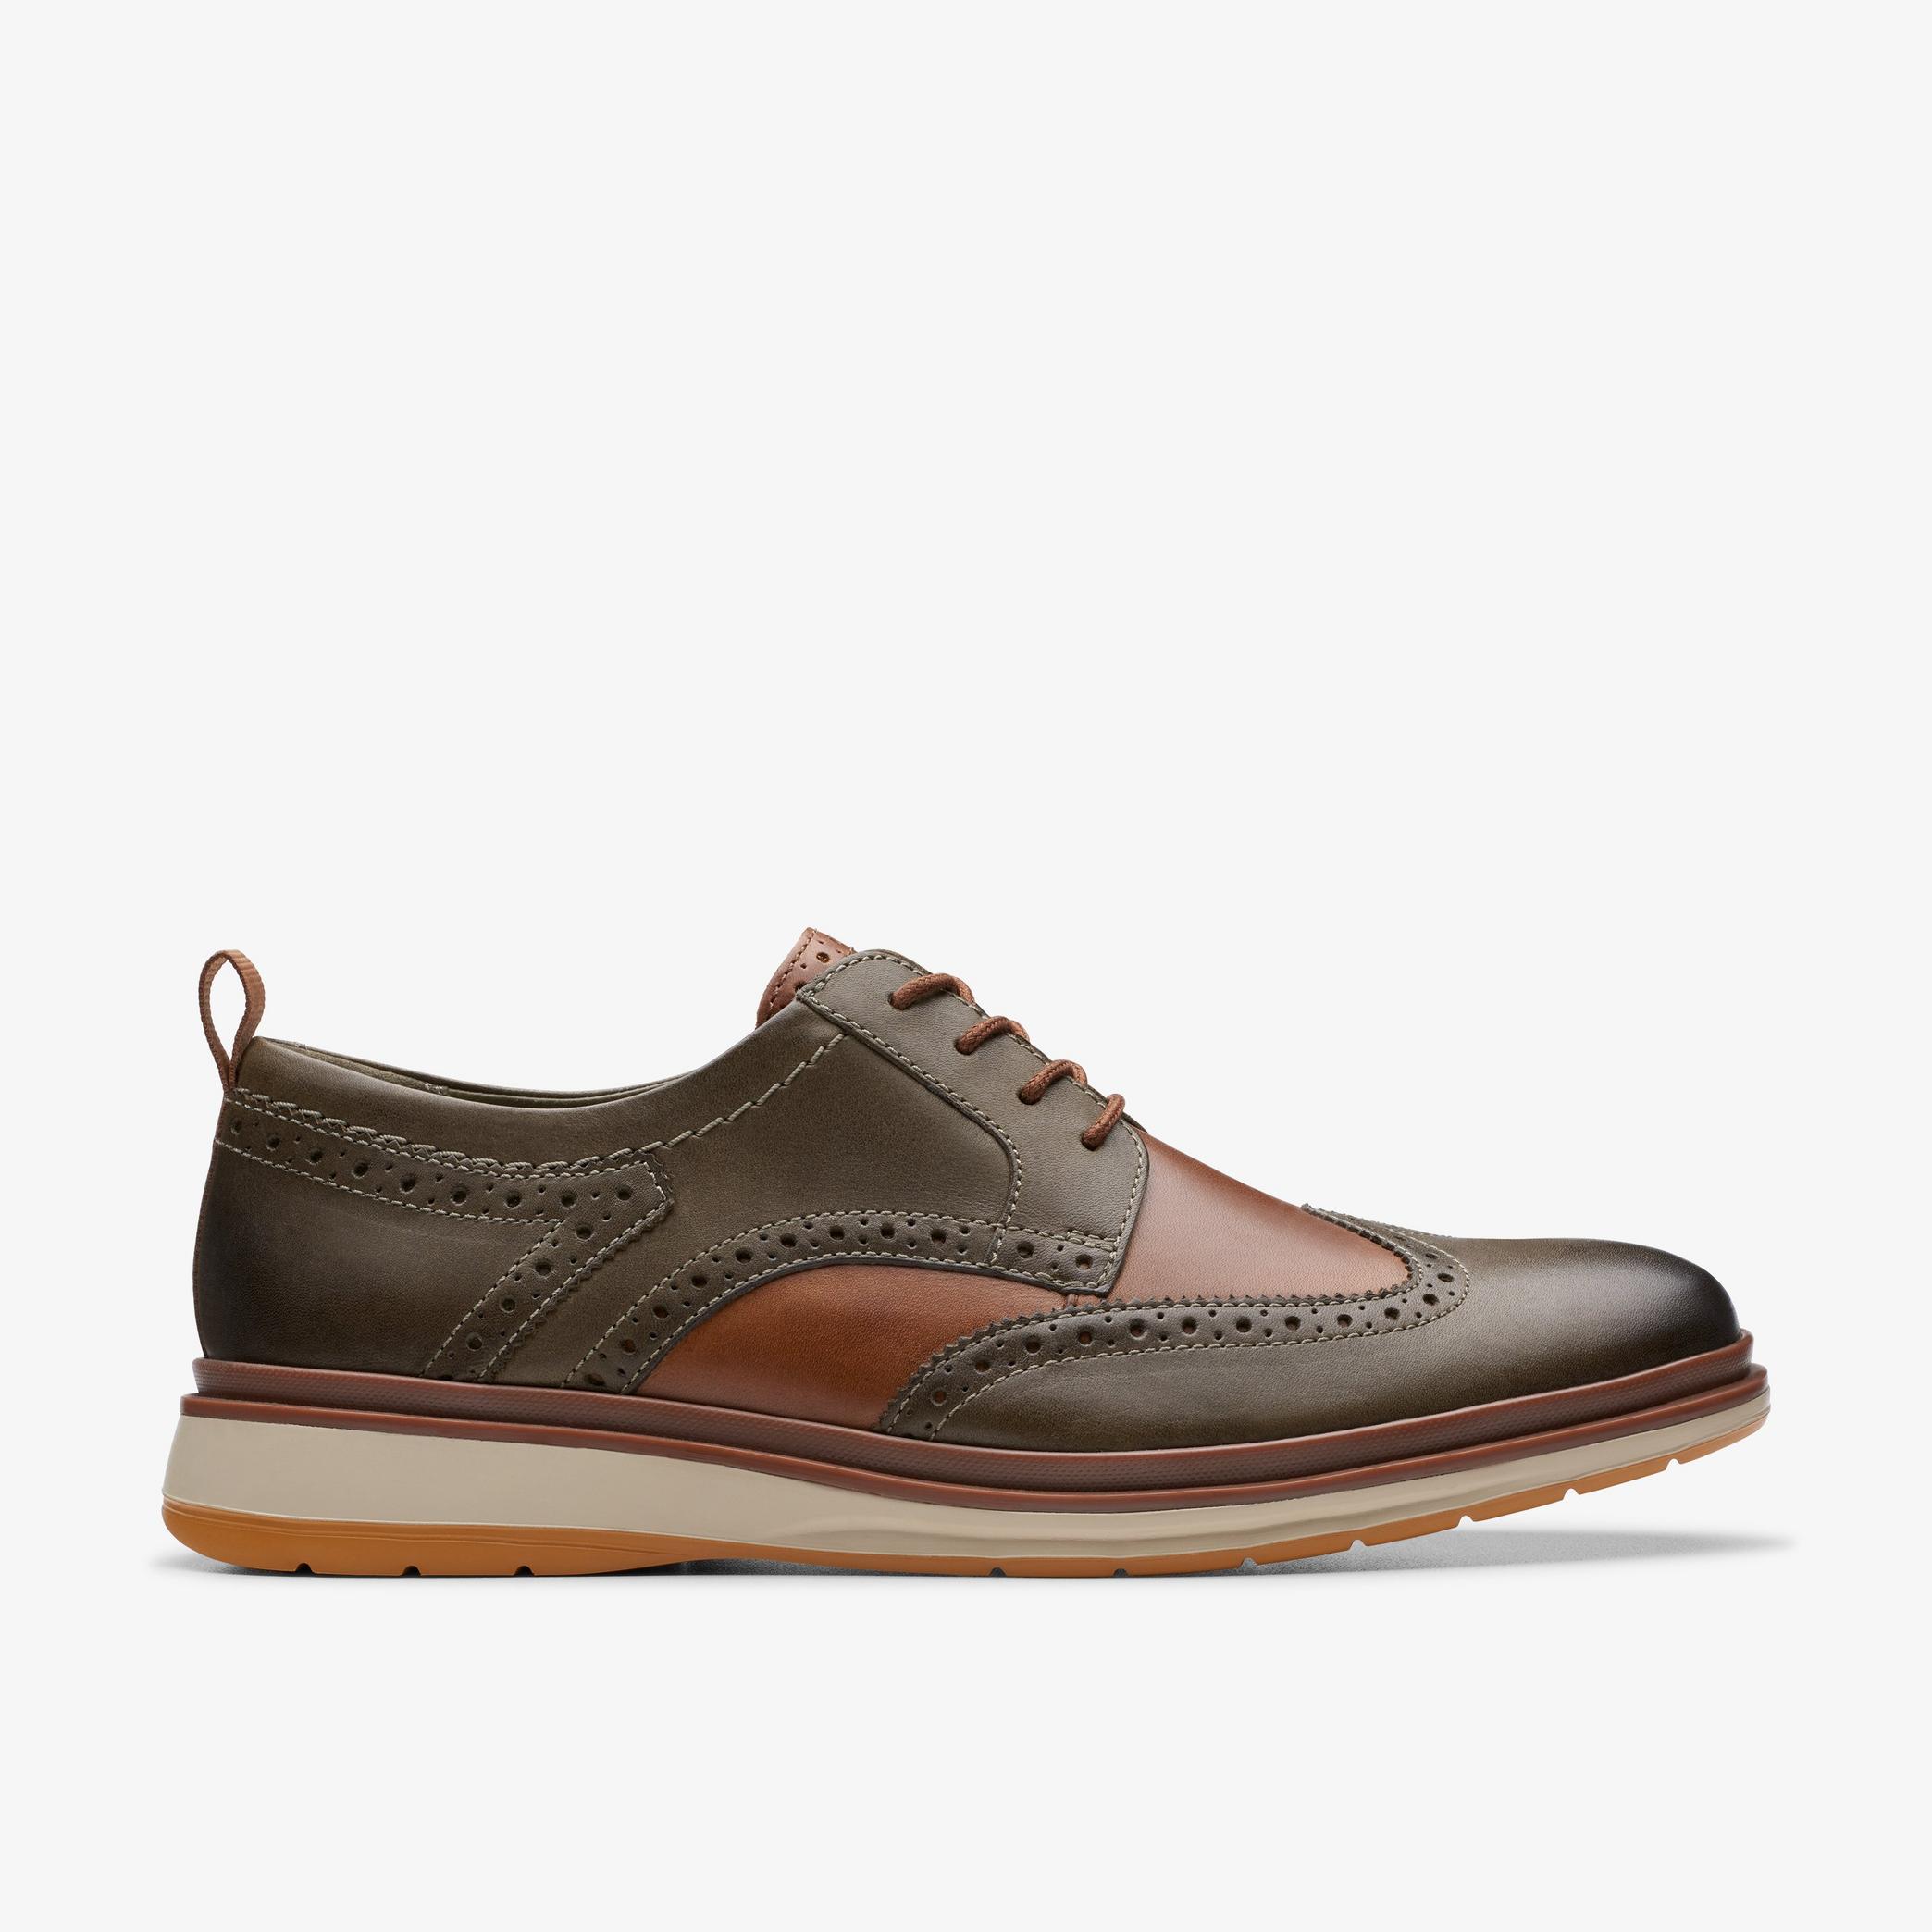 Chantry Wing Dark Olive Combination Oxford Shoes, view 1 of 7